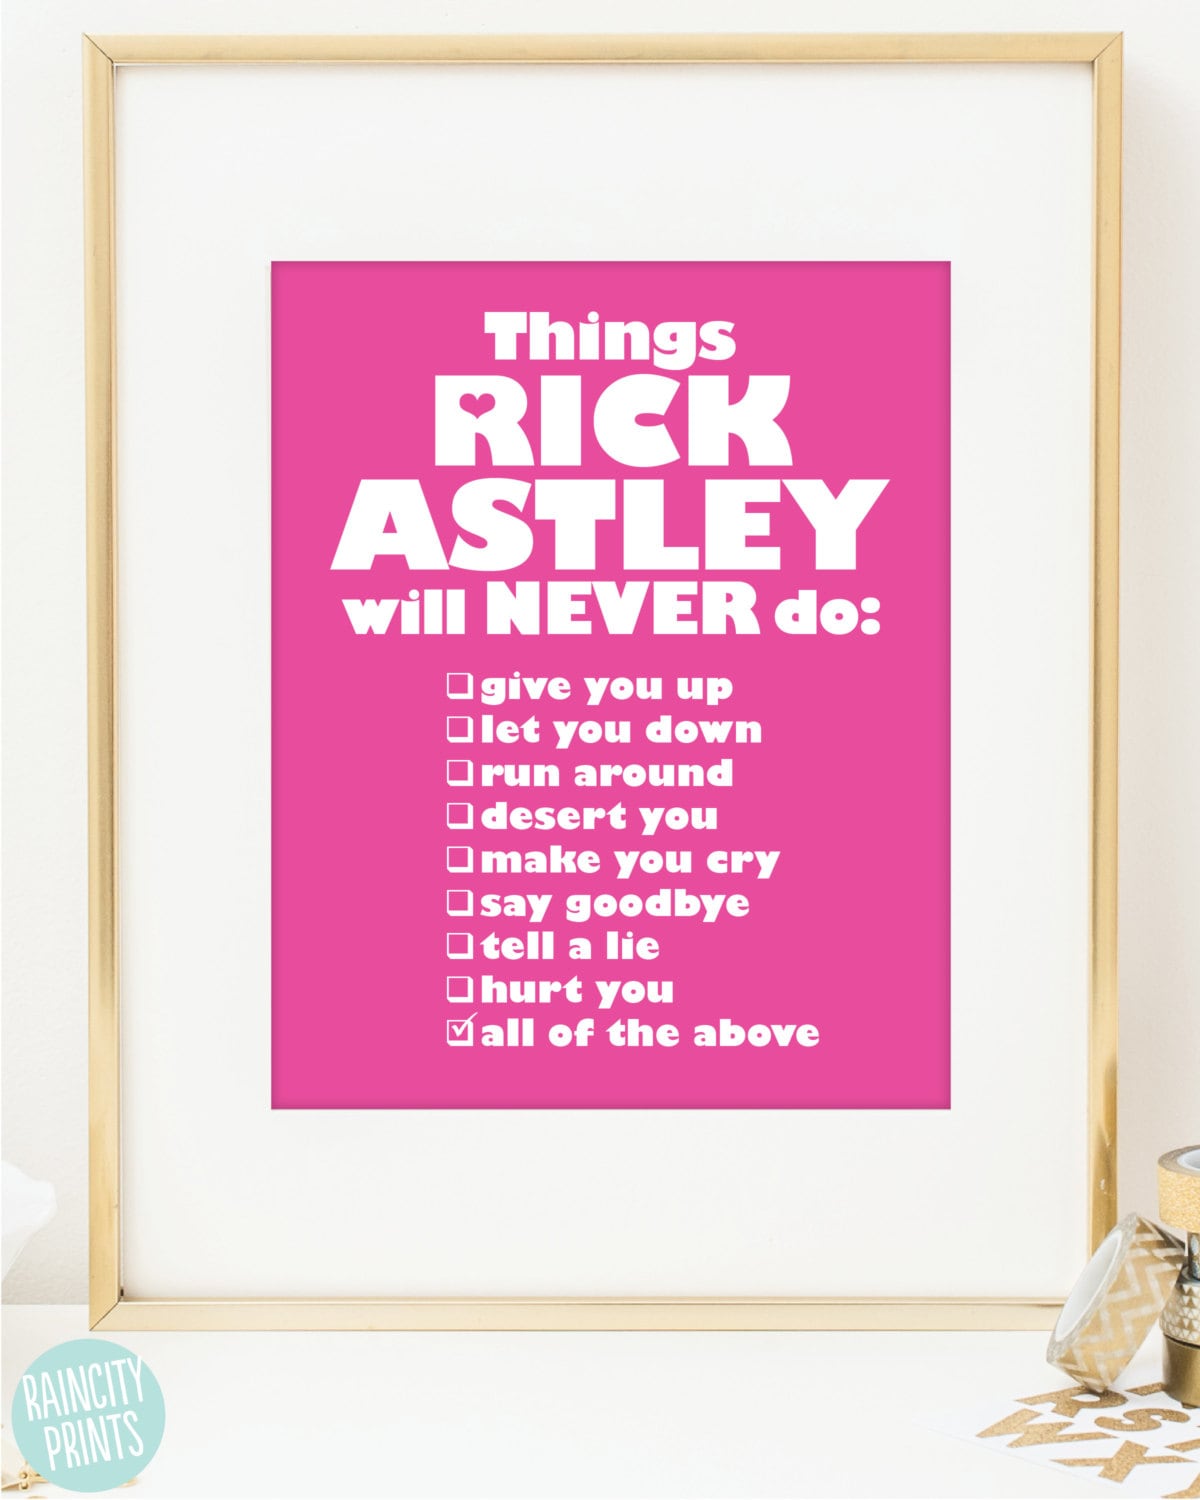 Rick Astley portrait Rickrolling rick-roll Never Gonna Give You Up Zip  Pouch by Argo - Fine Art America